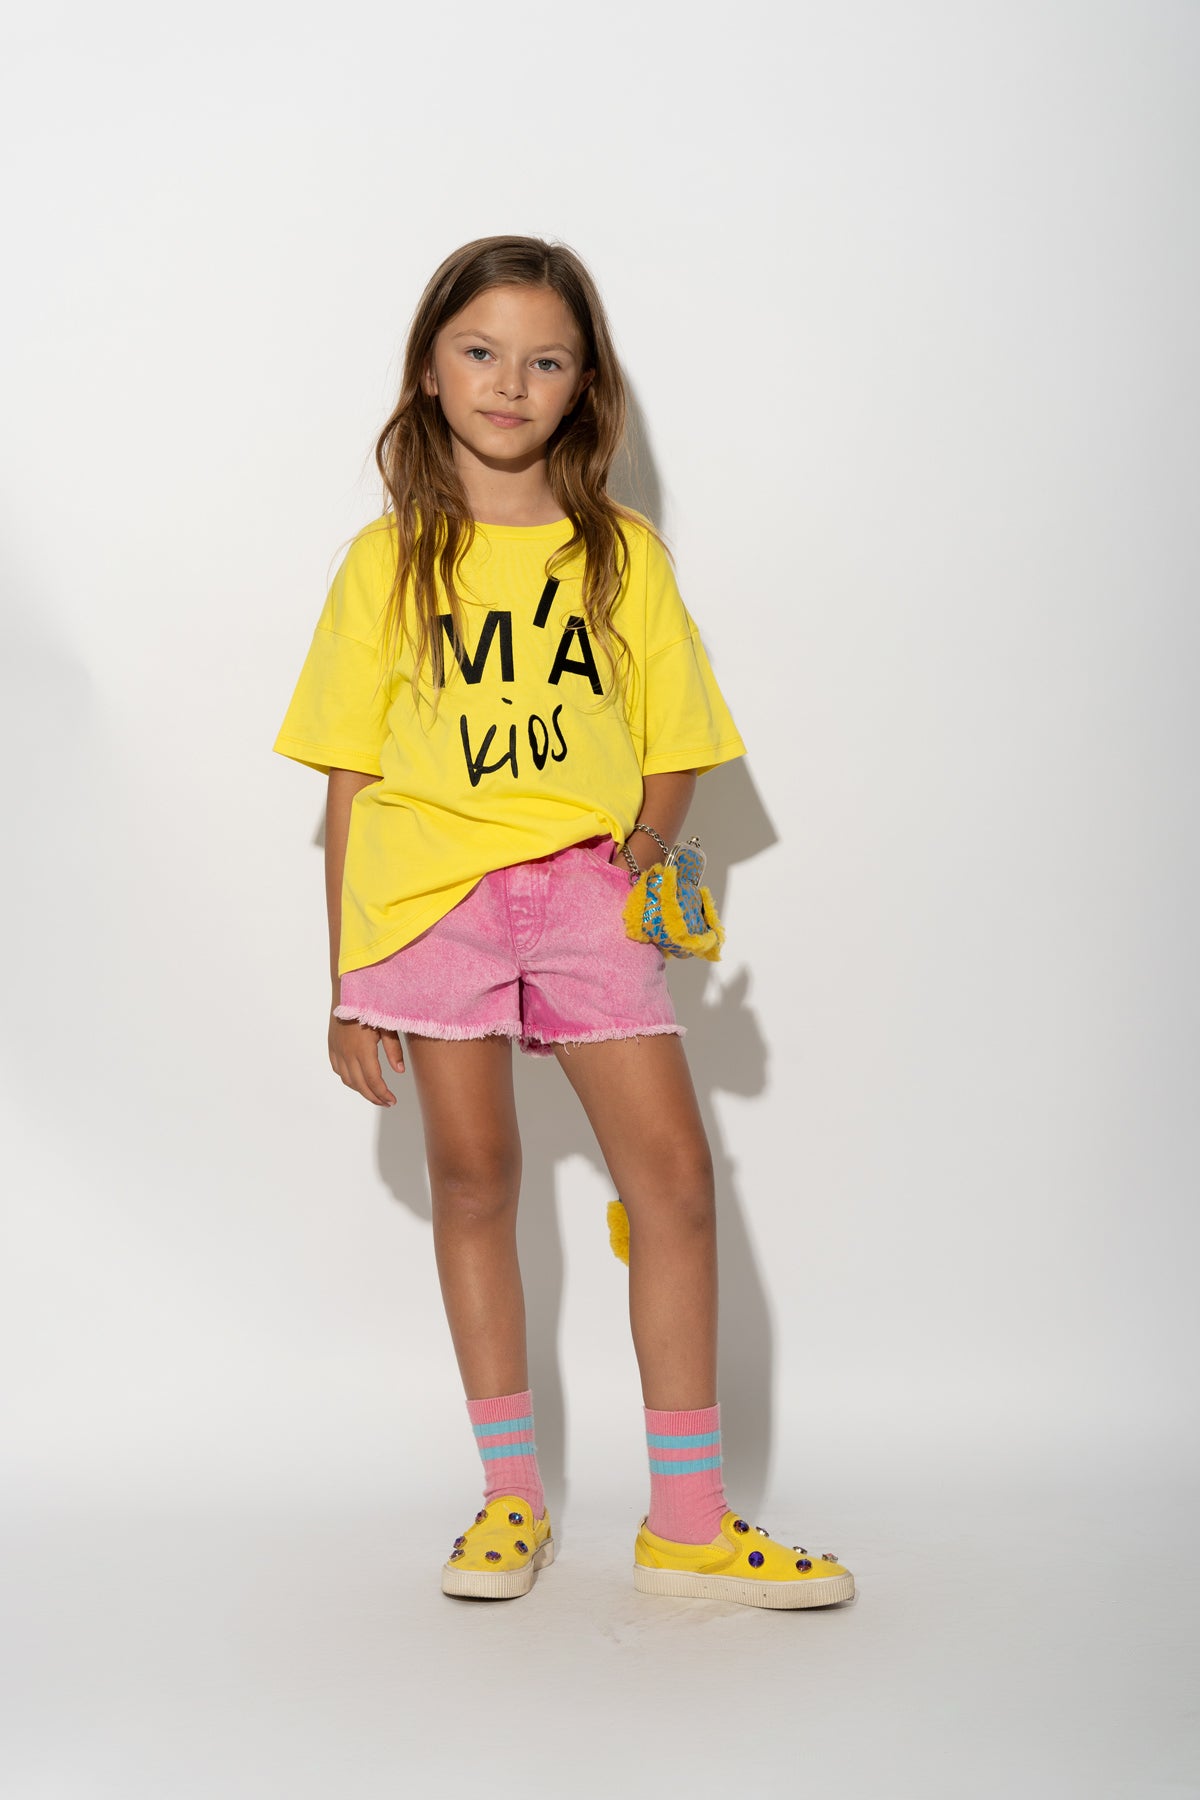 YELLOW T-SHIRT WITH EMBROIDERED LOGO makids